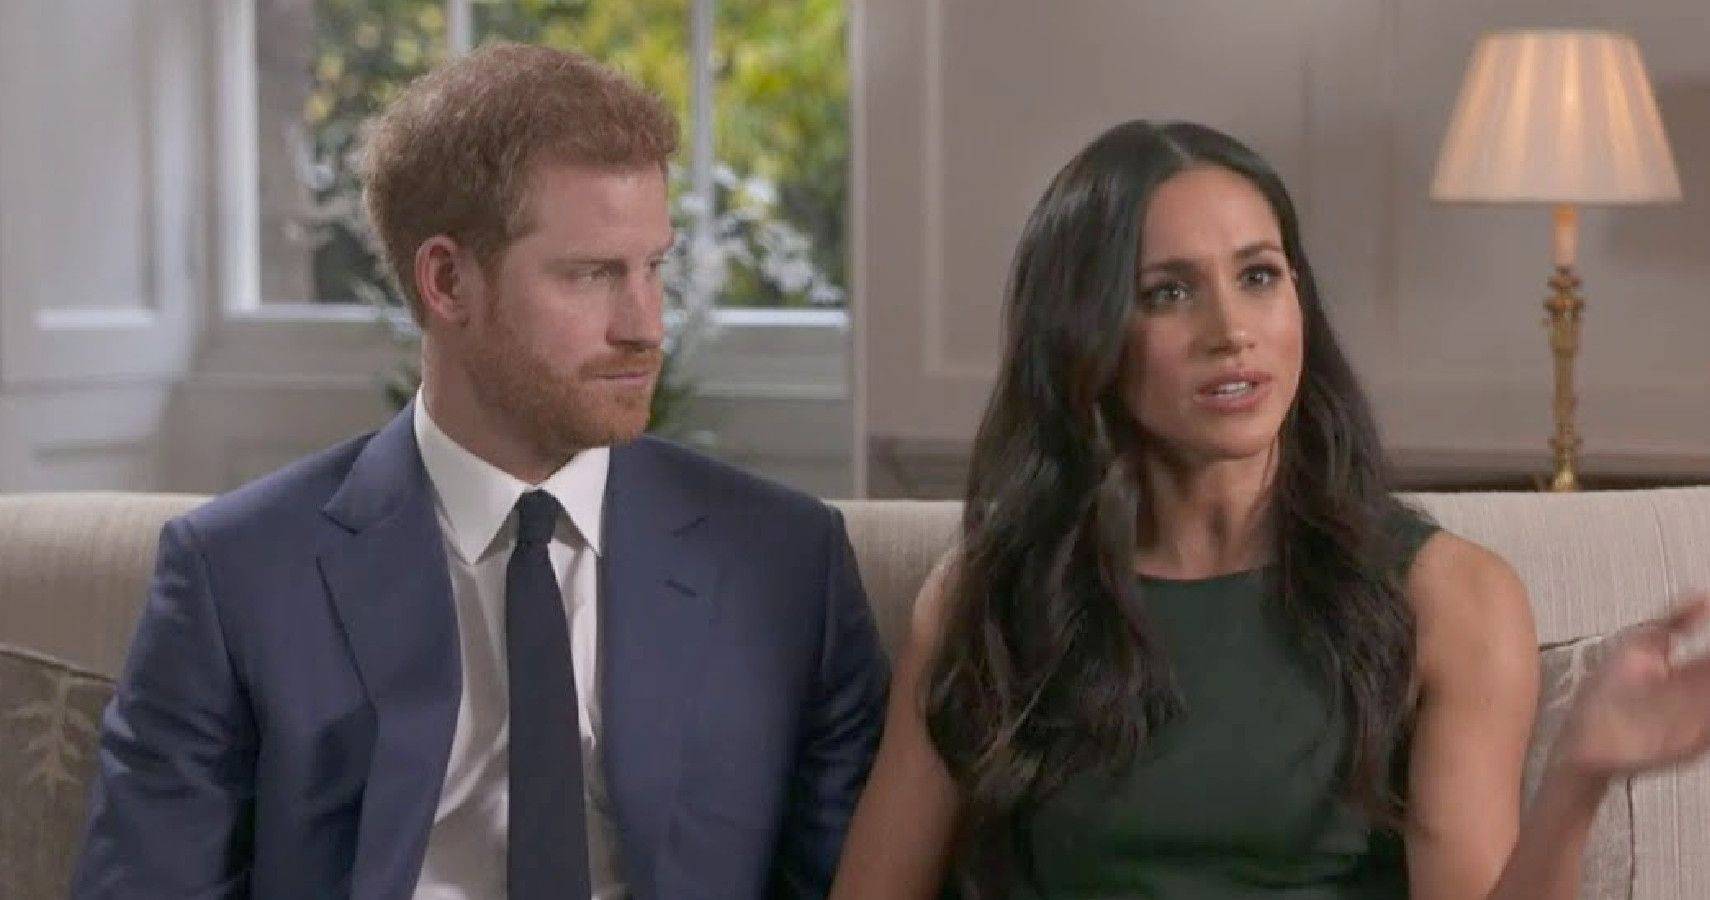 Prince Harry & Meghan Markle Have Reportedly Hired Divorce Lawyers